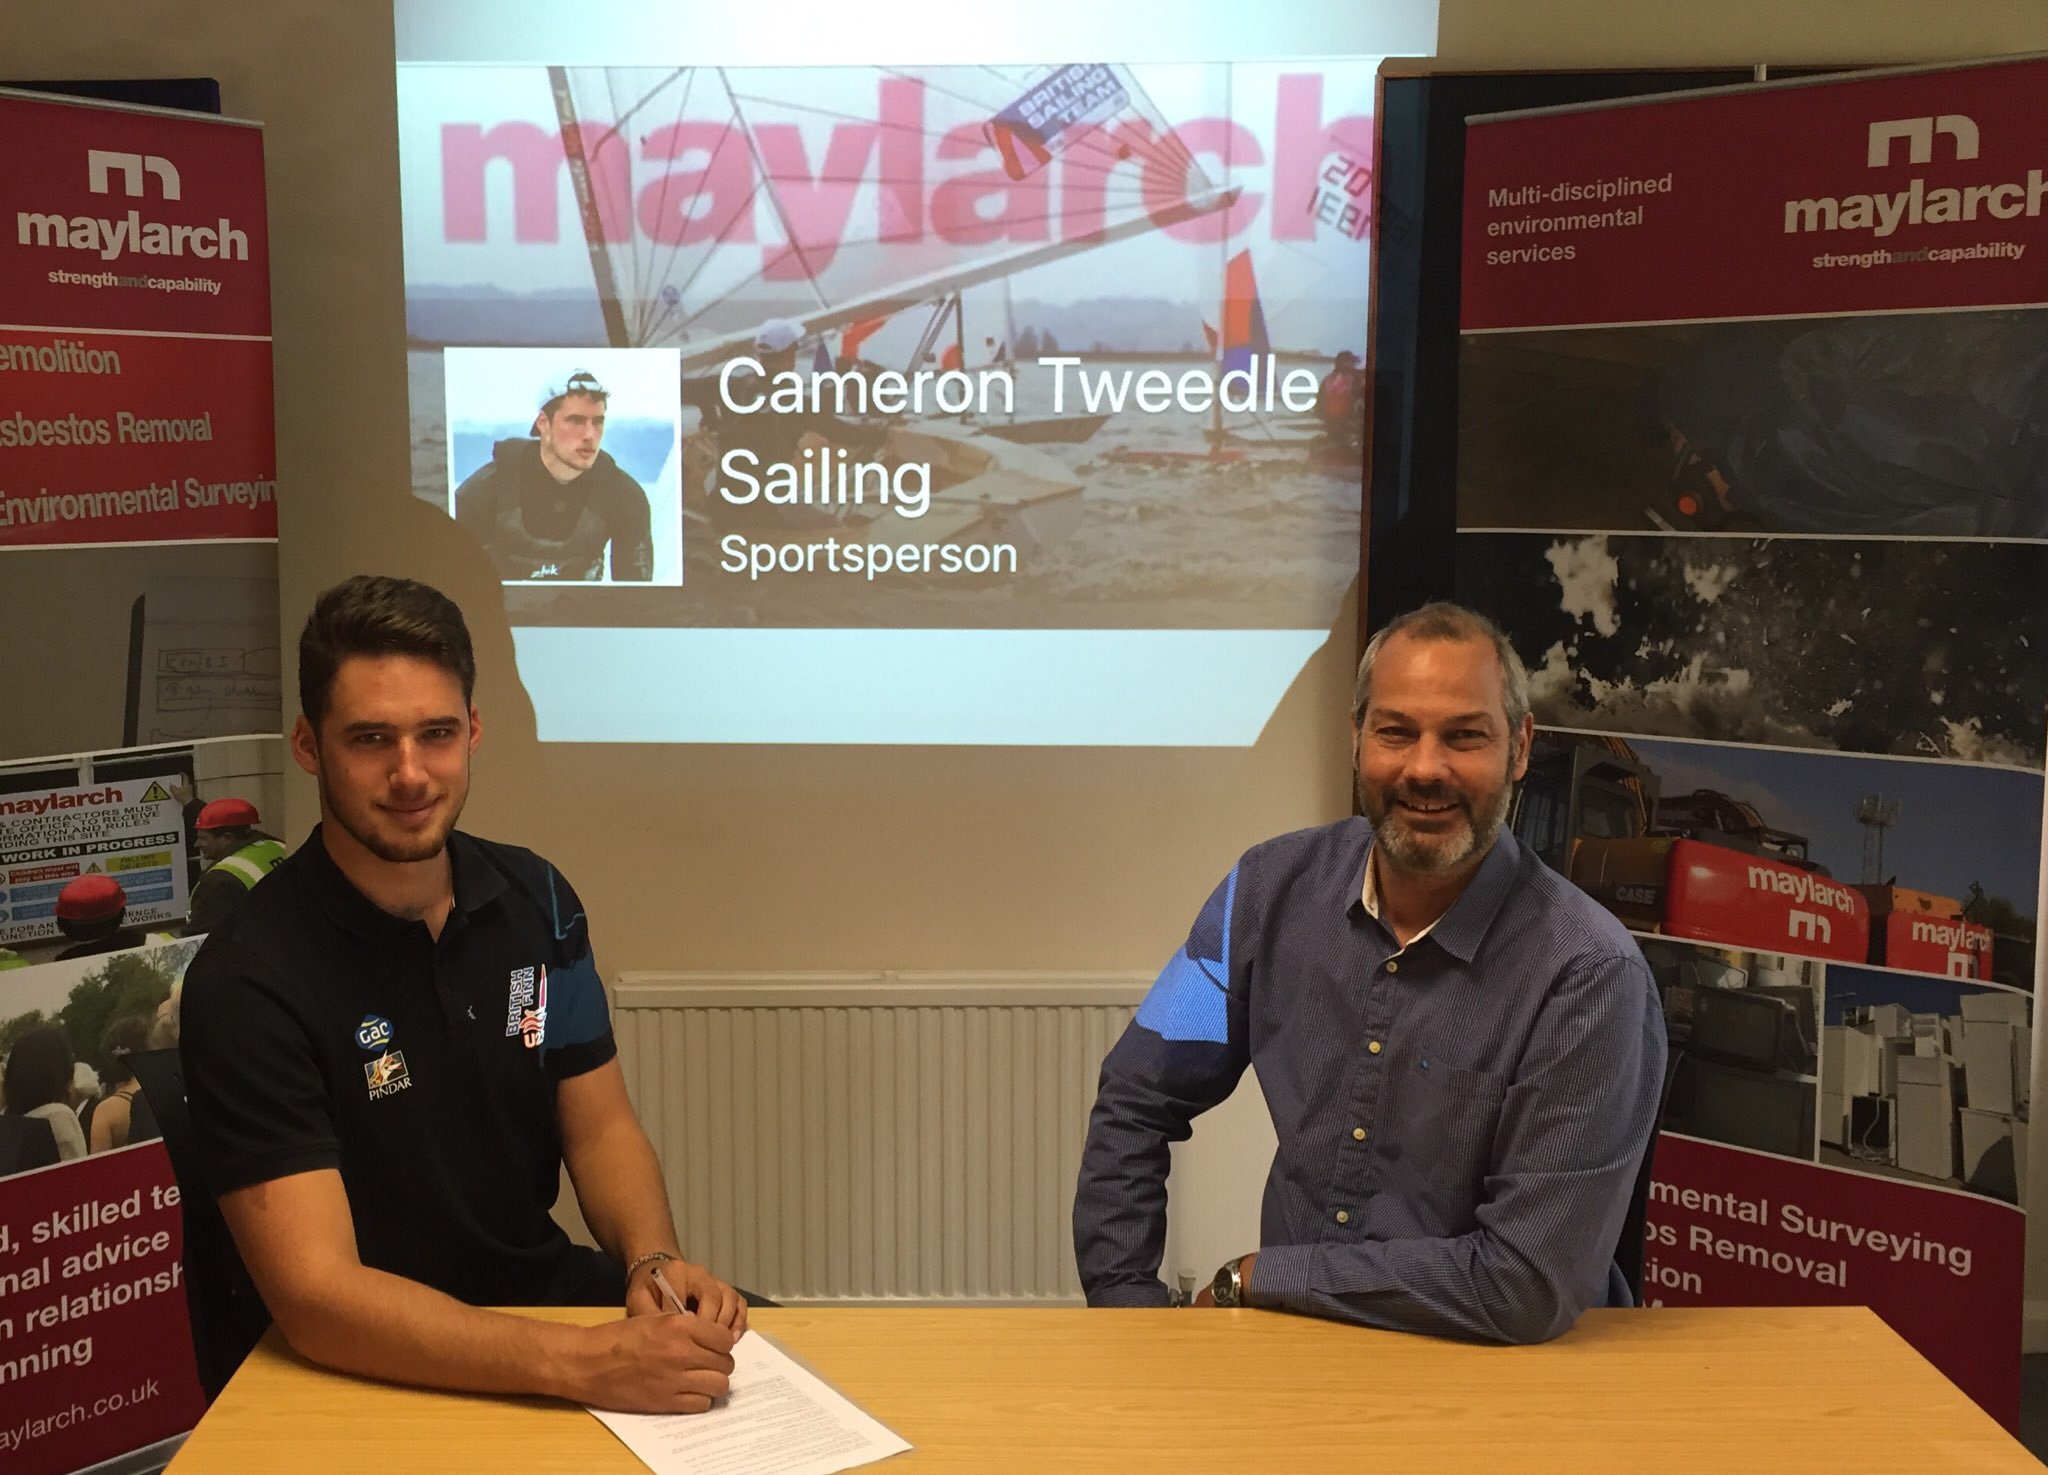 Maylarch commits to Cameron Tweedle sailing